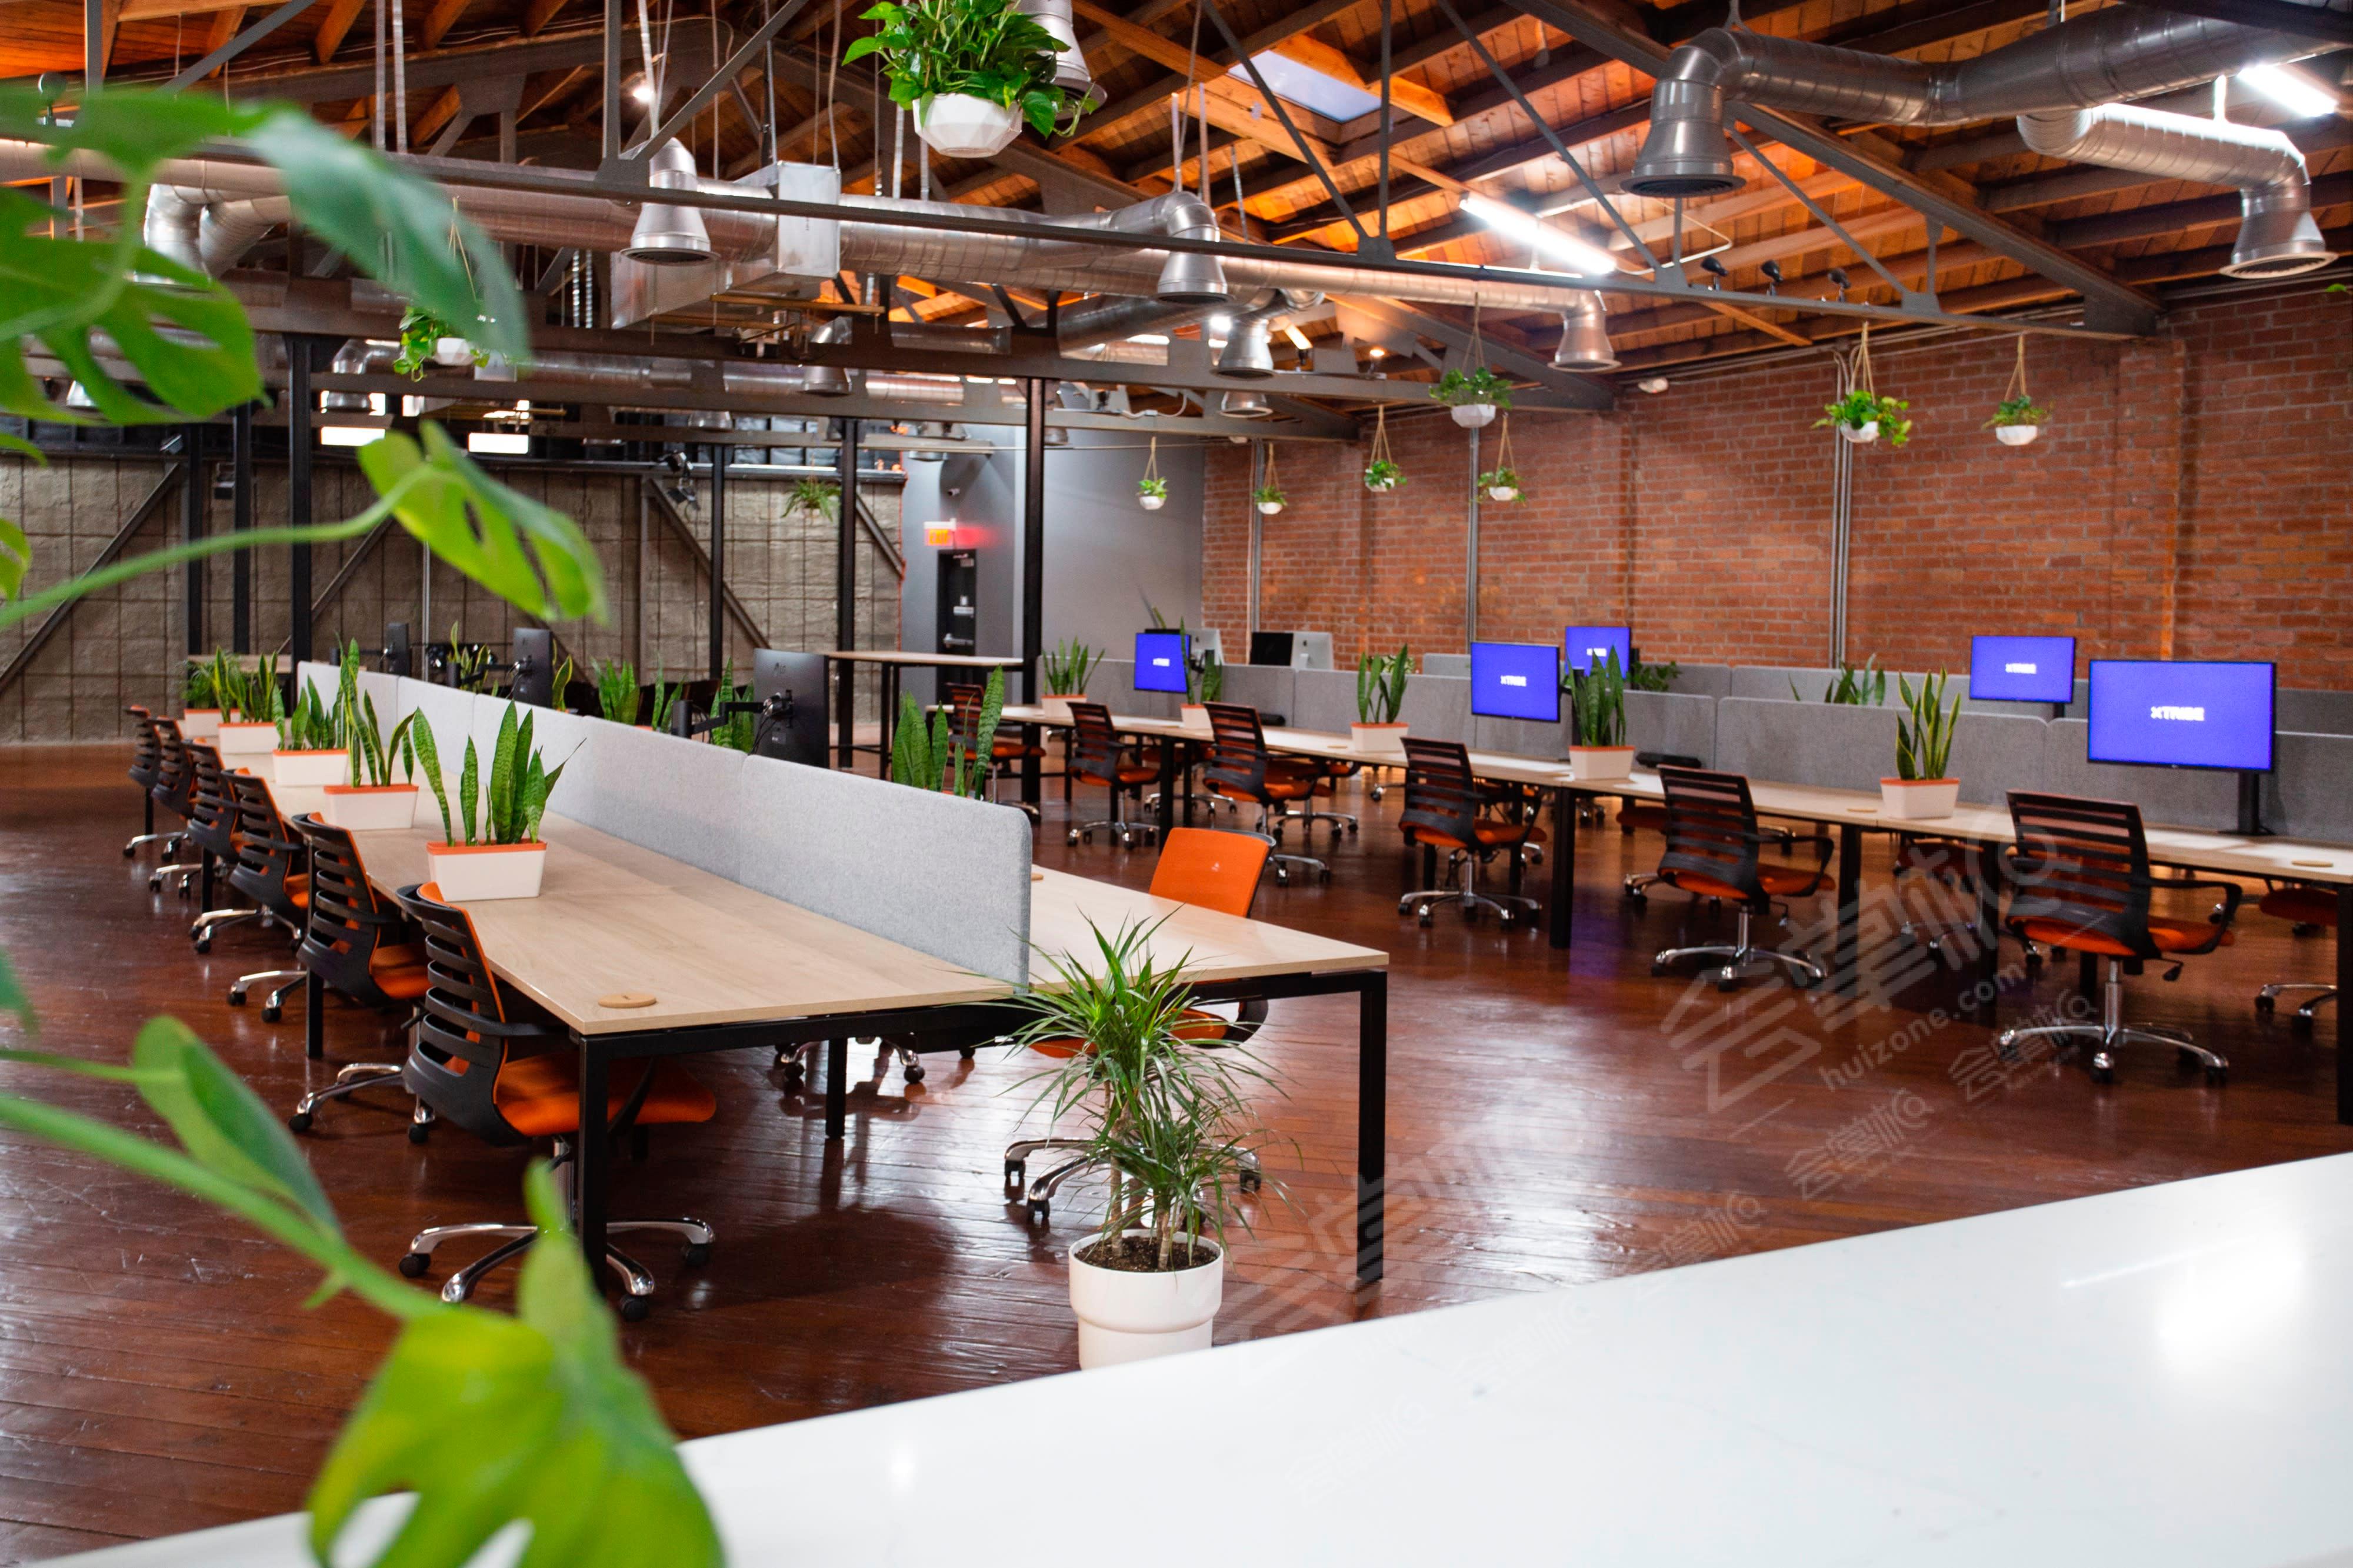 Private Coworking Space with 62 Desks, Event Stage, Kitchen and 3 Restrooms